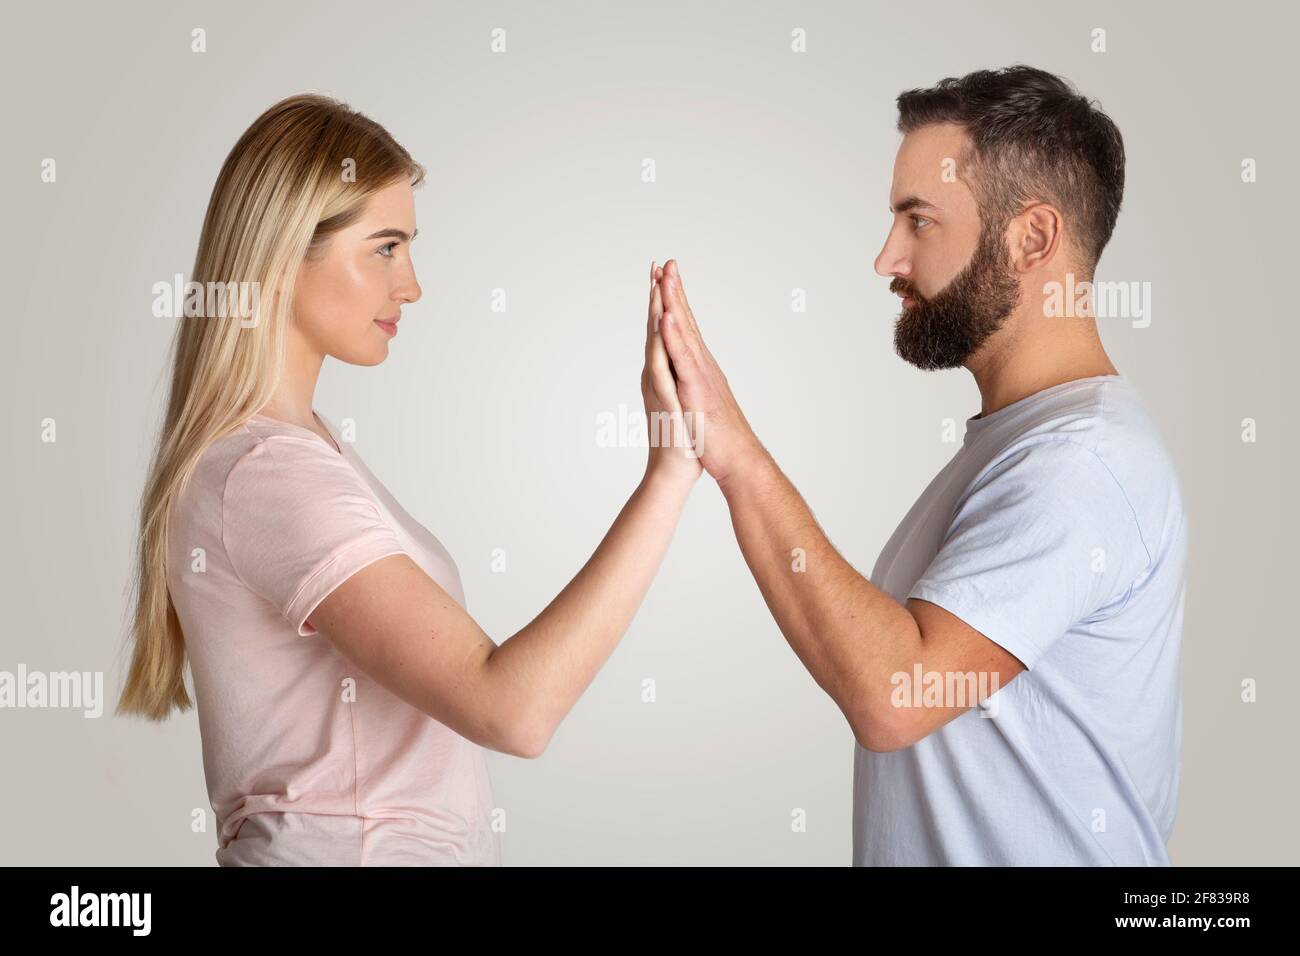 Confrontation, struggle for rights and equality, gender equality Stock Photo